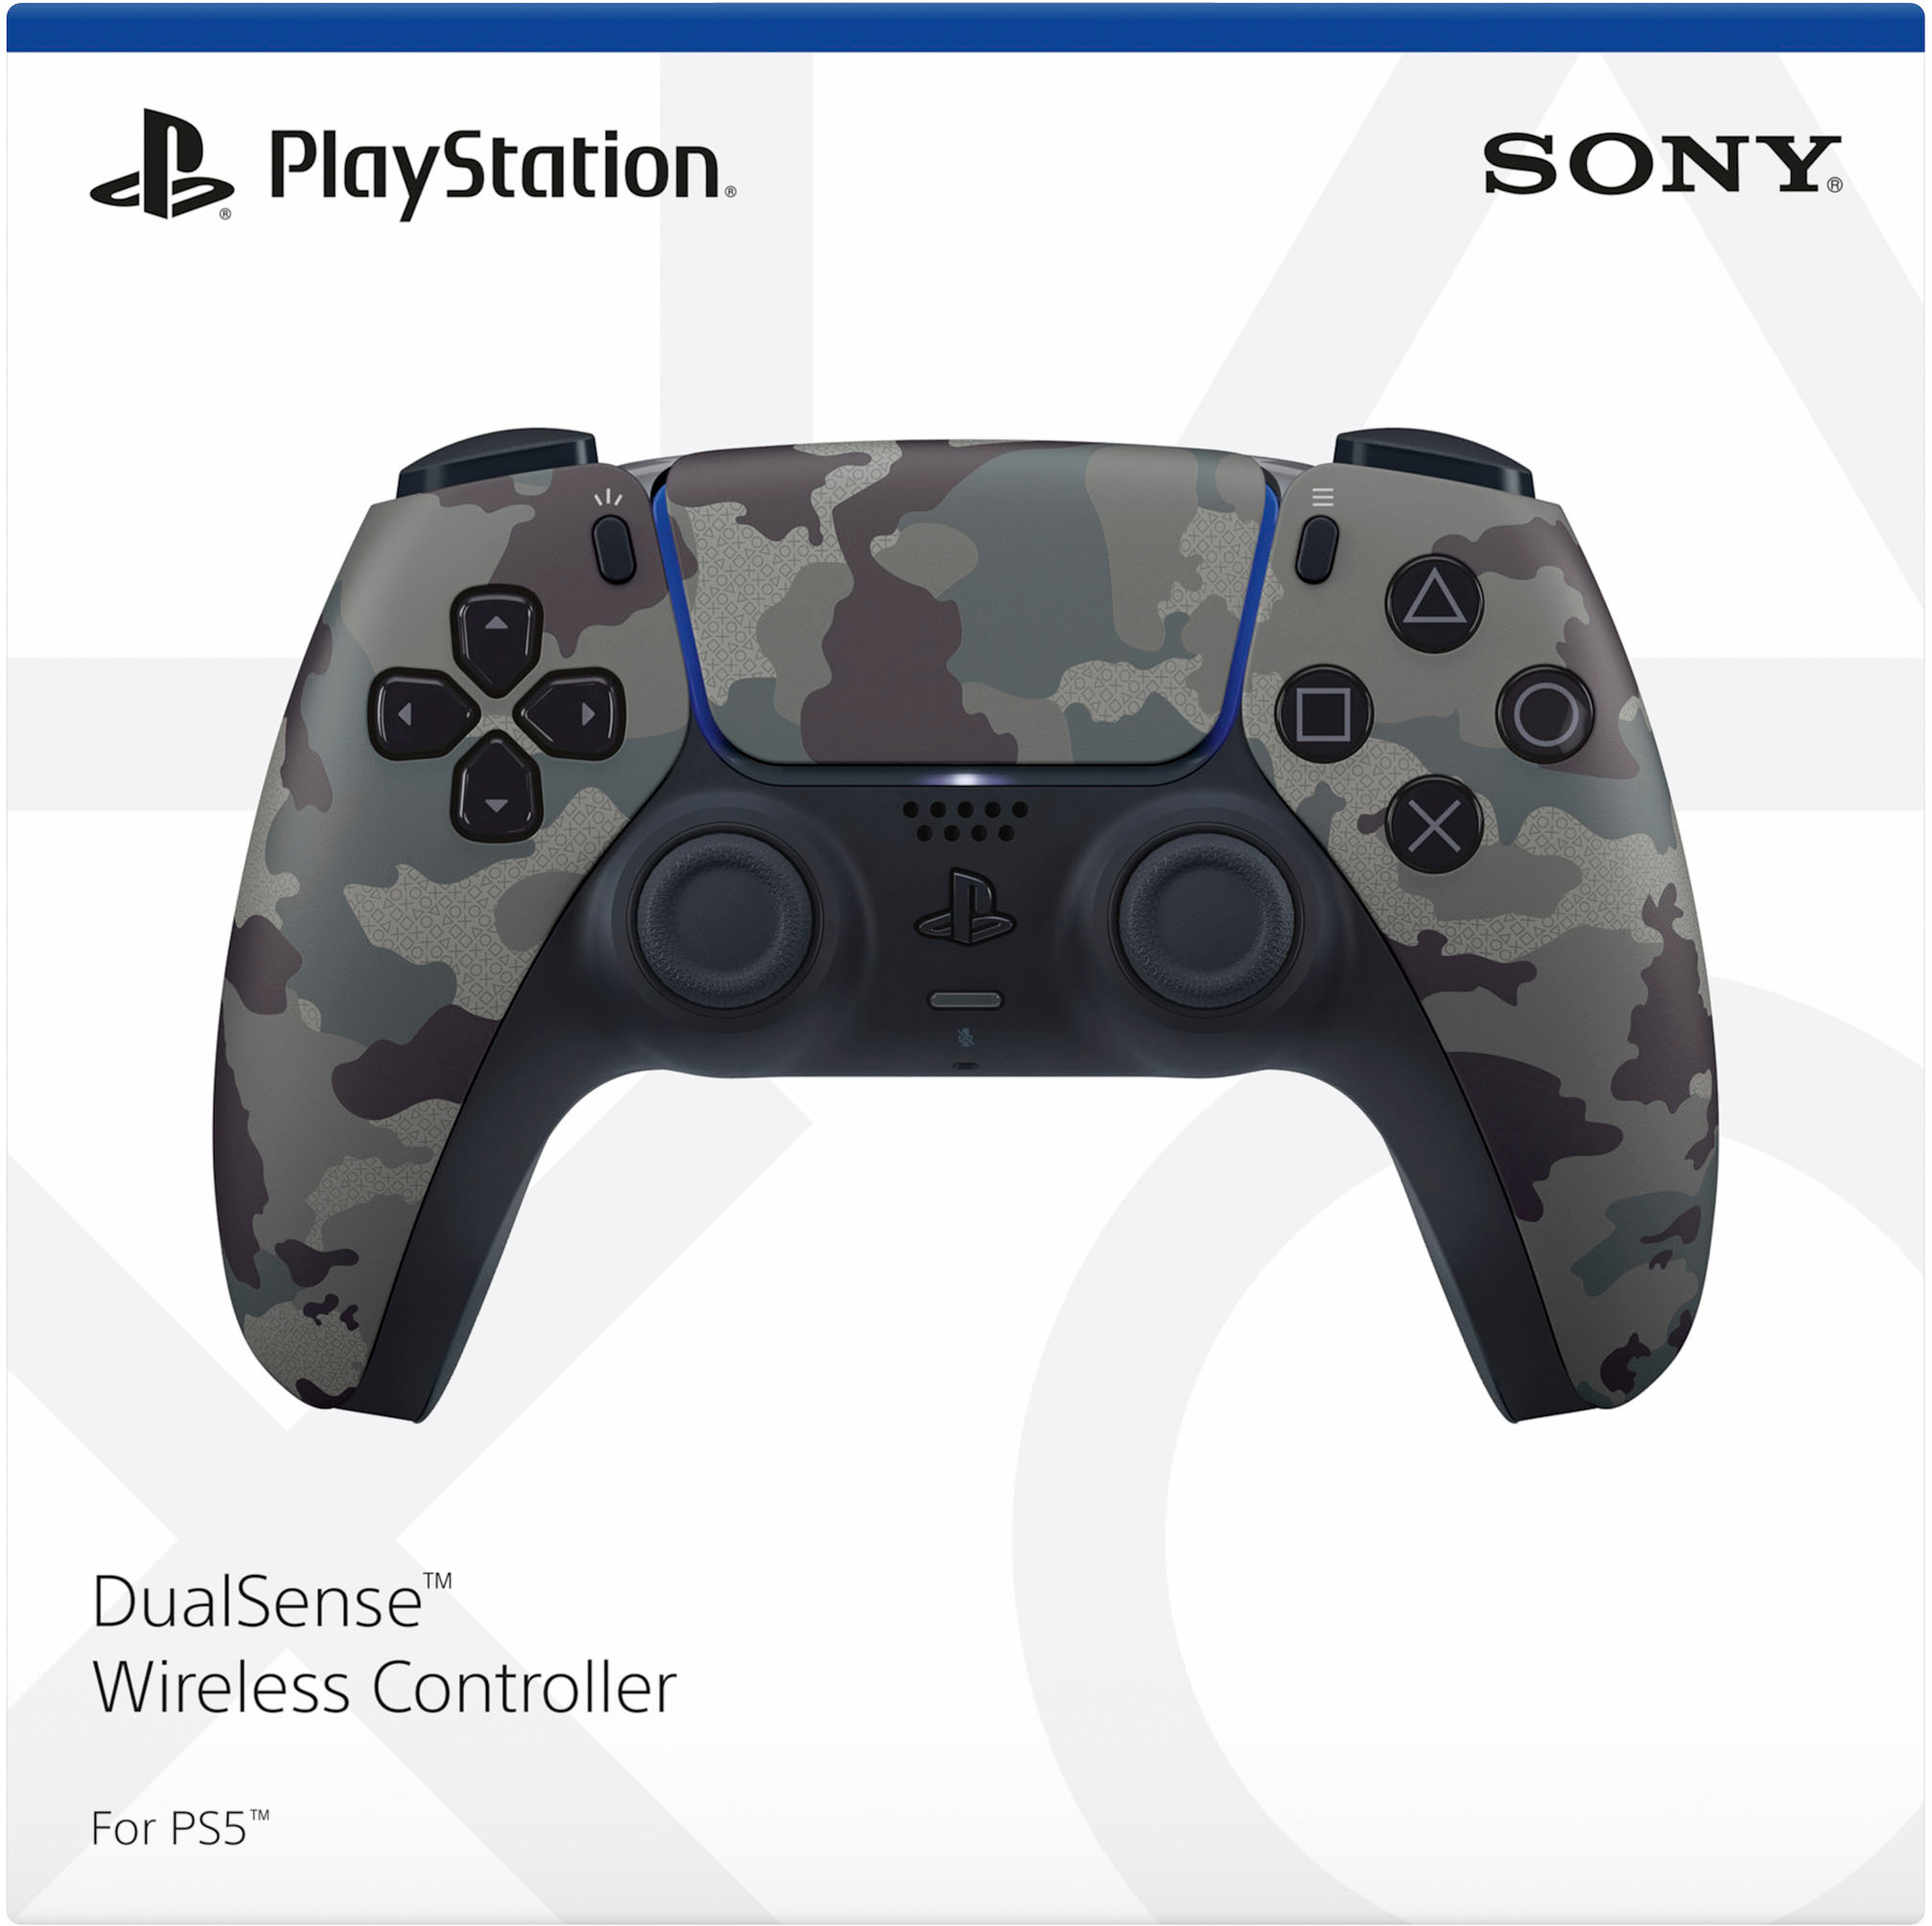 DualShock 4 Wireless Controller for Sony PlayStation 4 Green Camouflage  3001544 - Best Buy